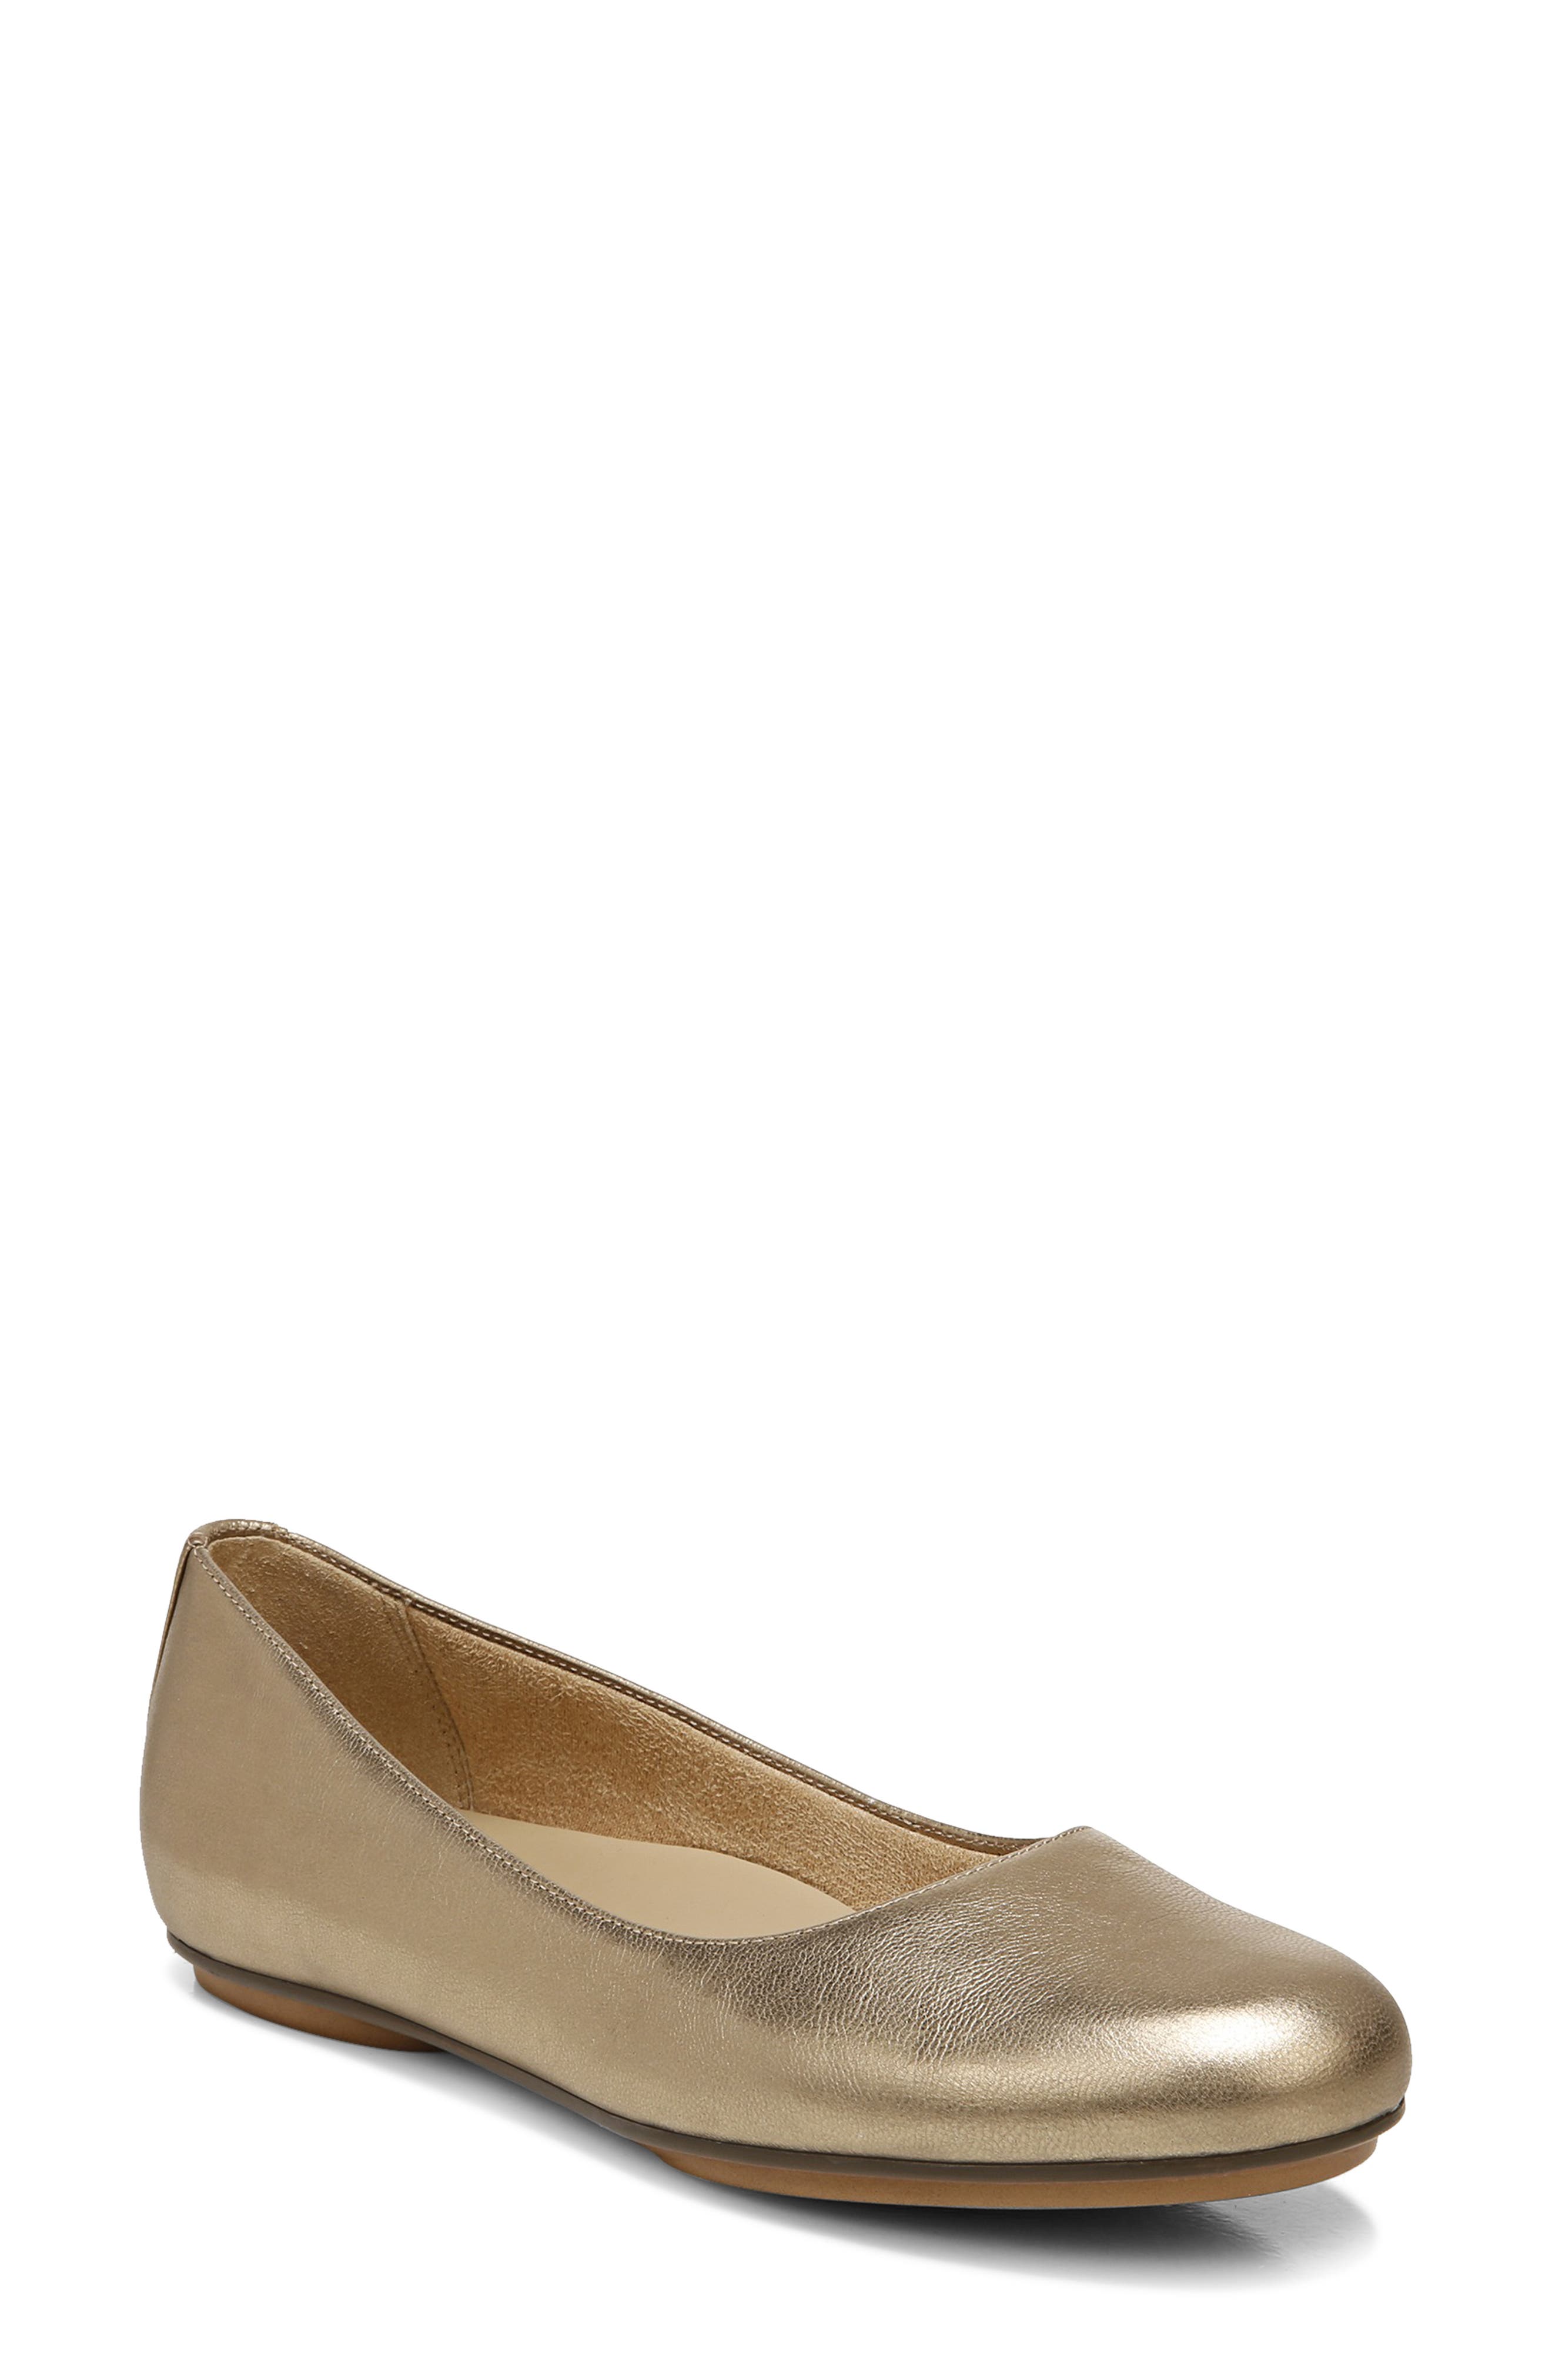 ballerina flats with arch support